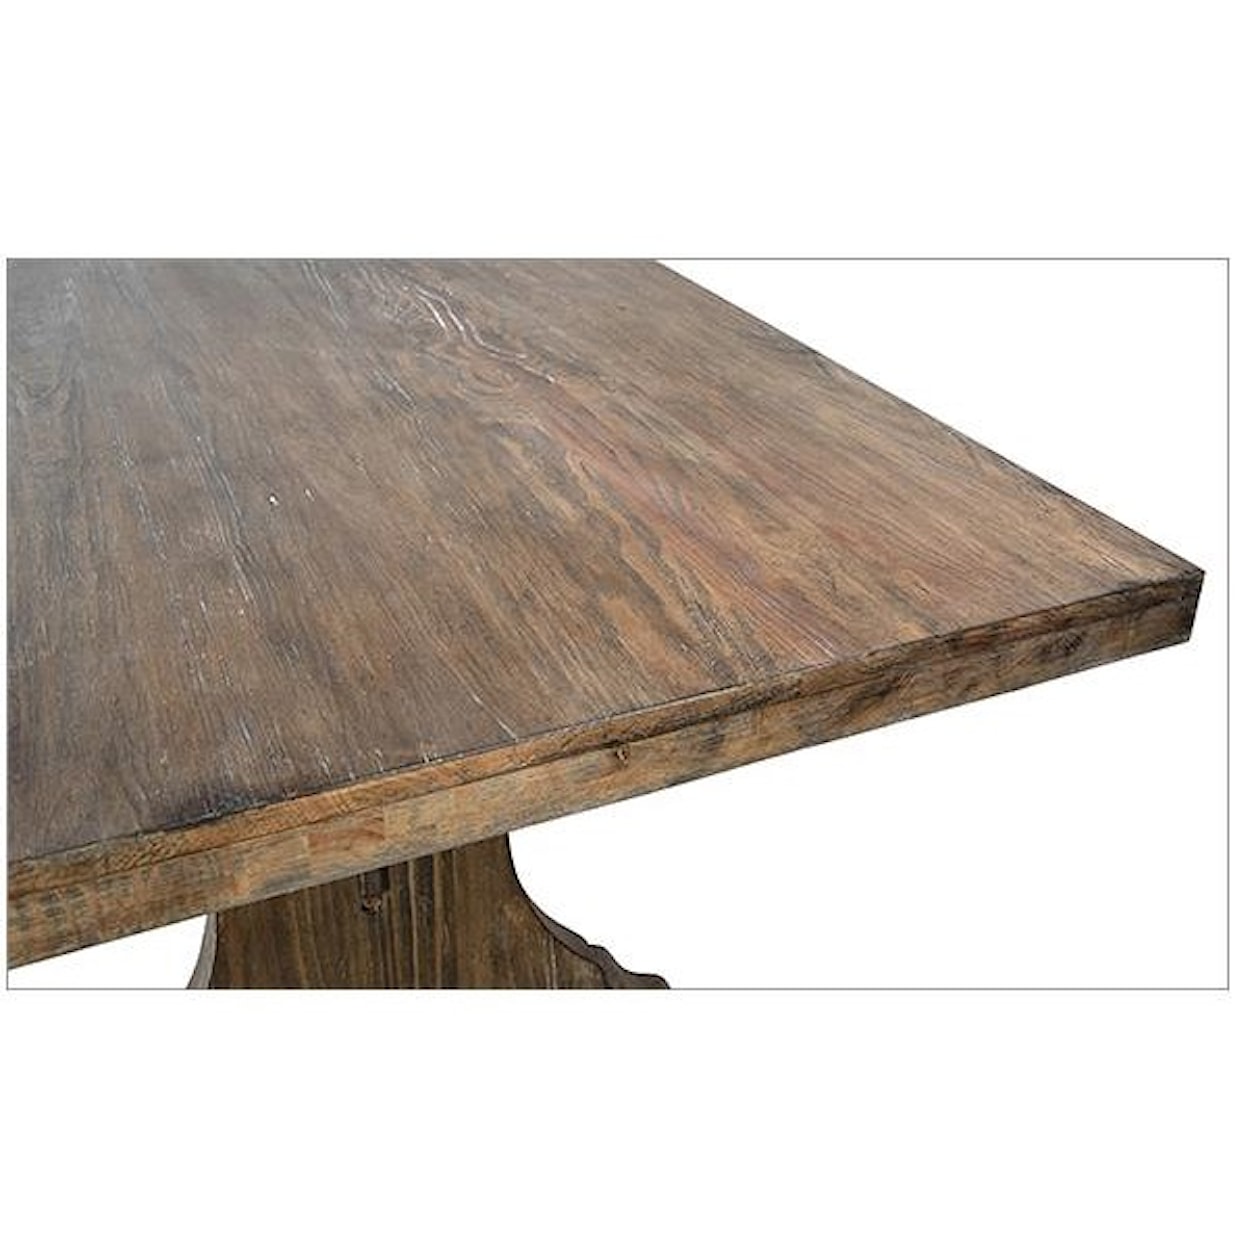 Dovetail Furniture Dining Tables Alano Dining Table